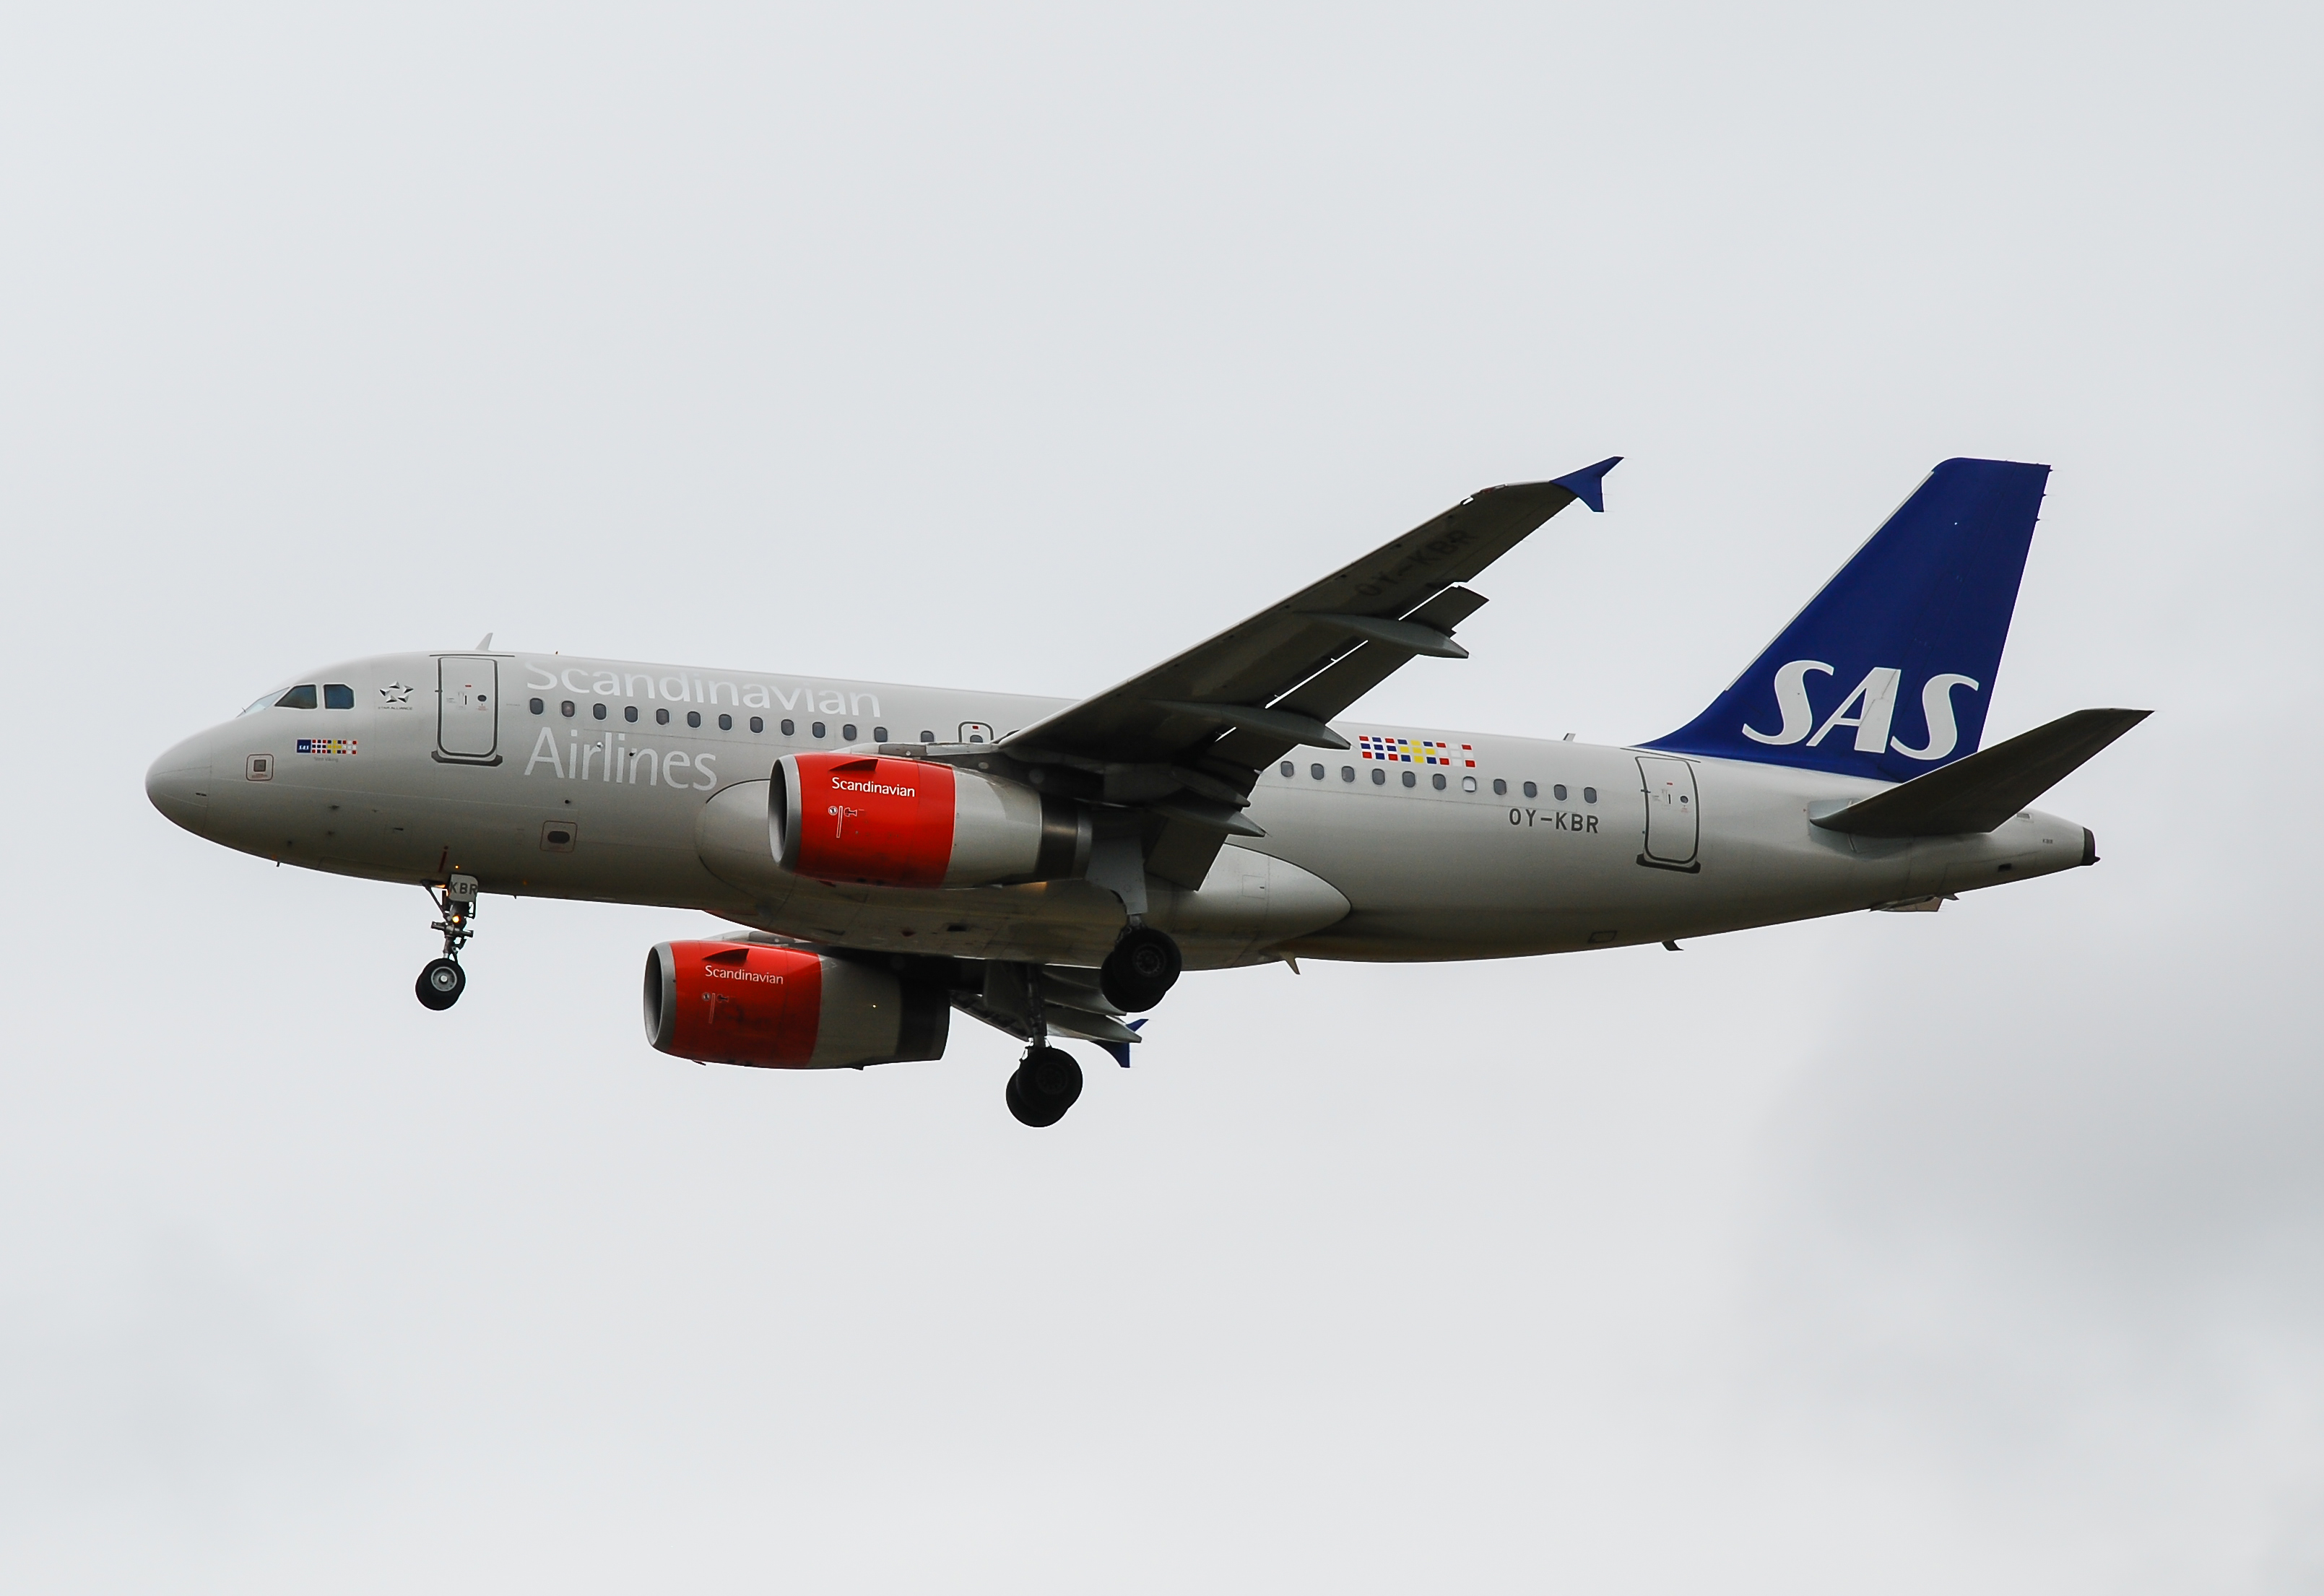 OY-KBR/OYKBR SAS Scandinavian Airlines Airbus A319 Airframe Information - AVSpotters.com